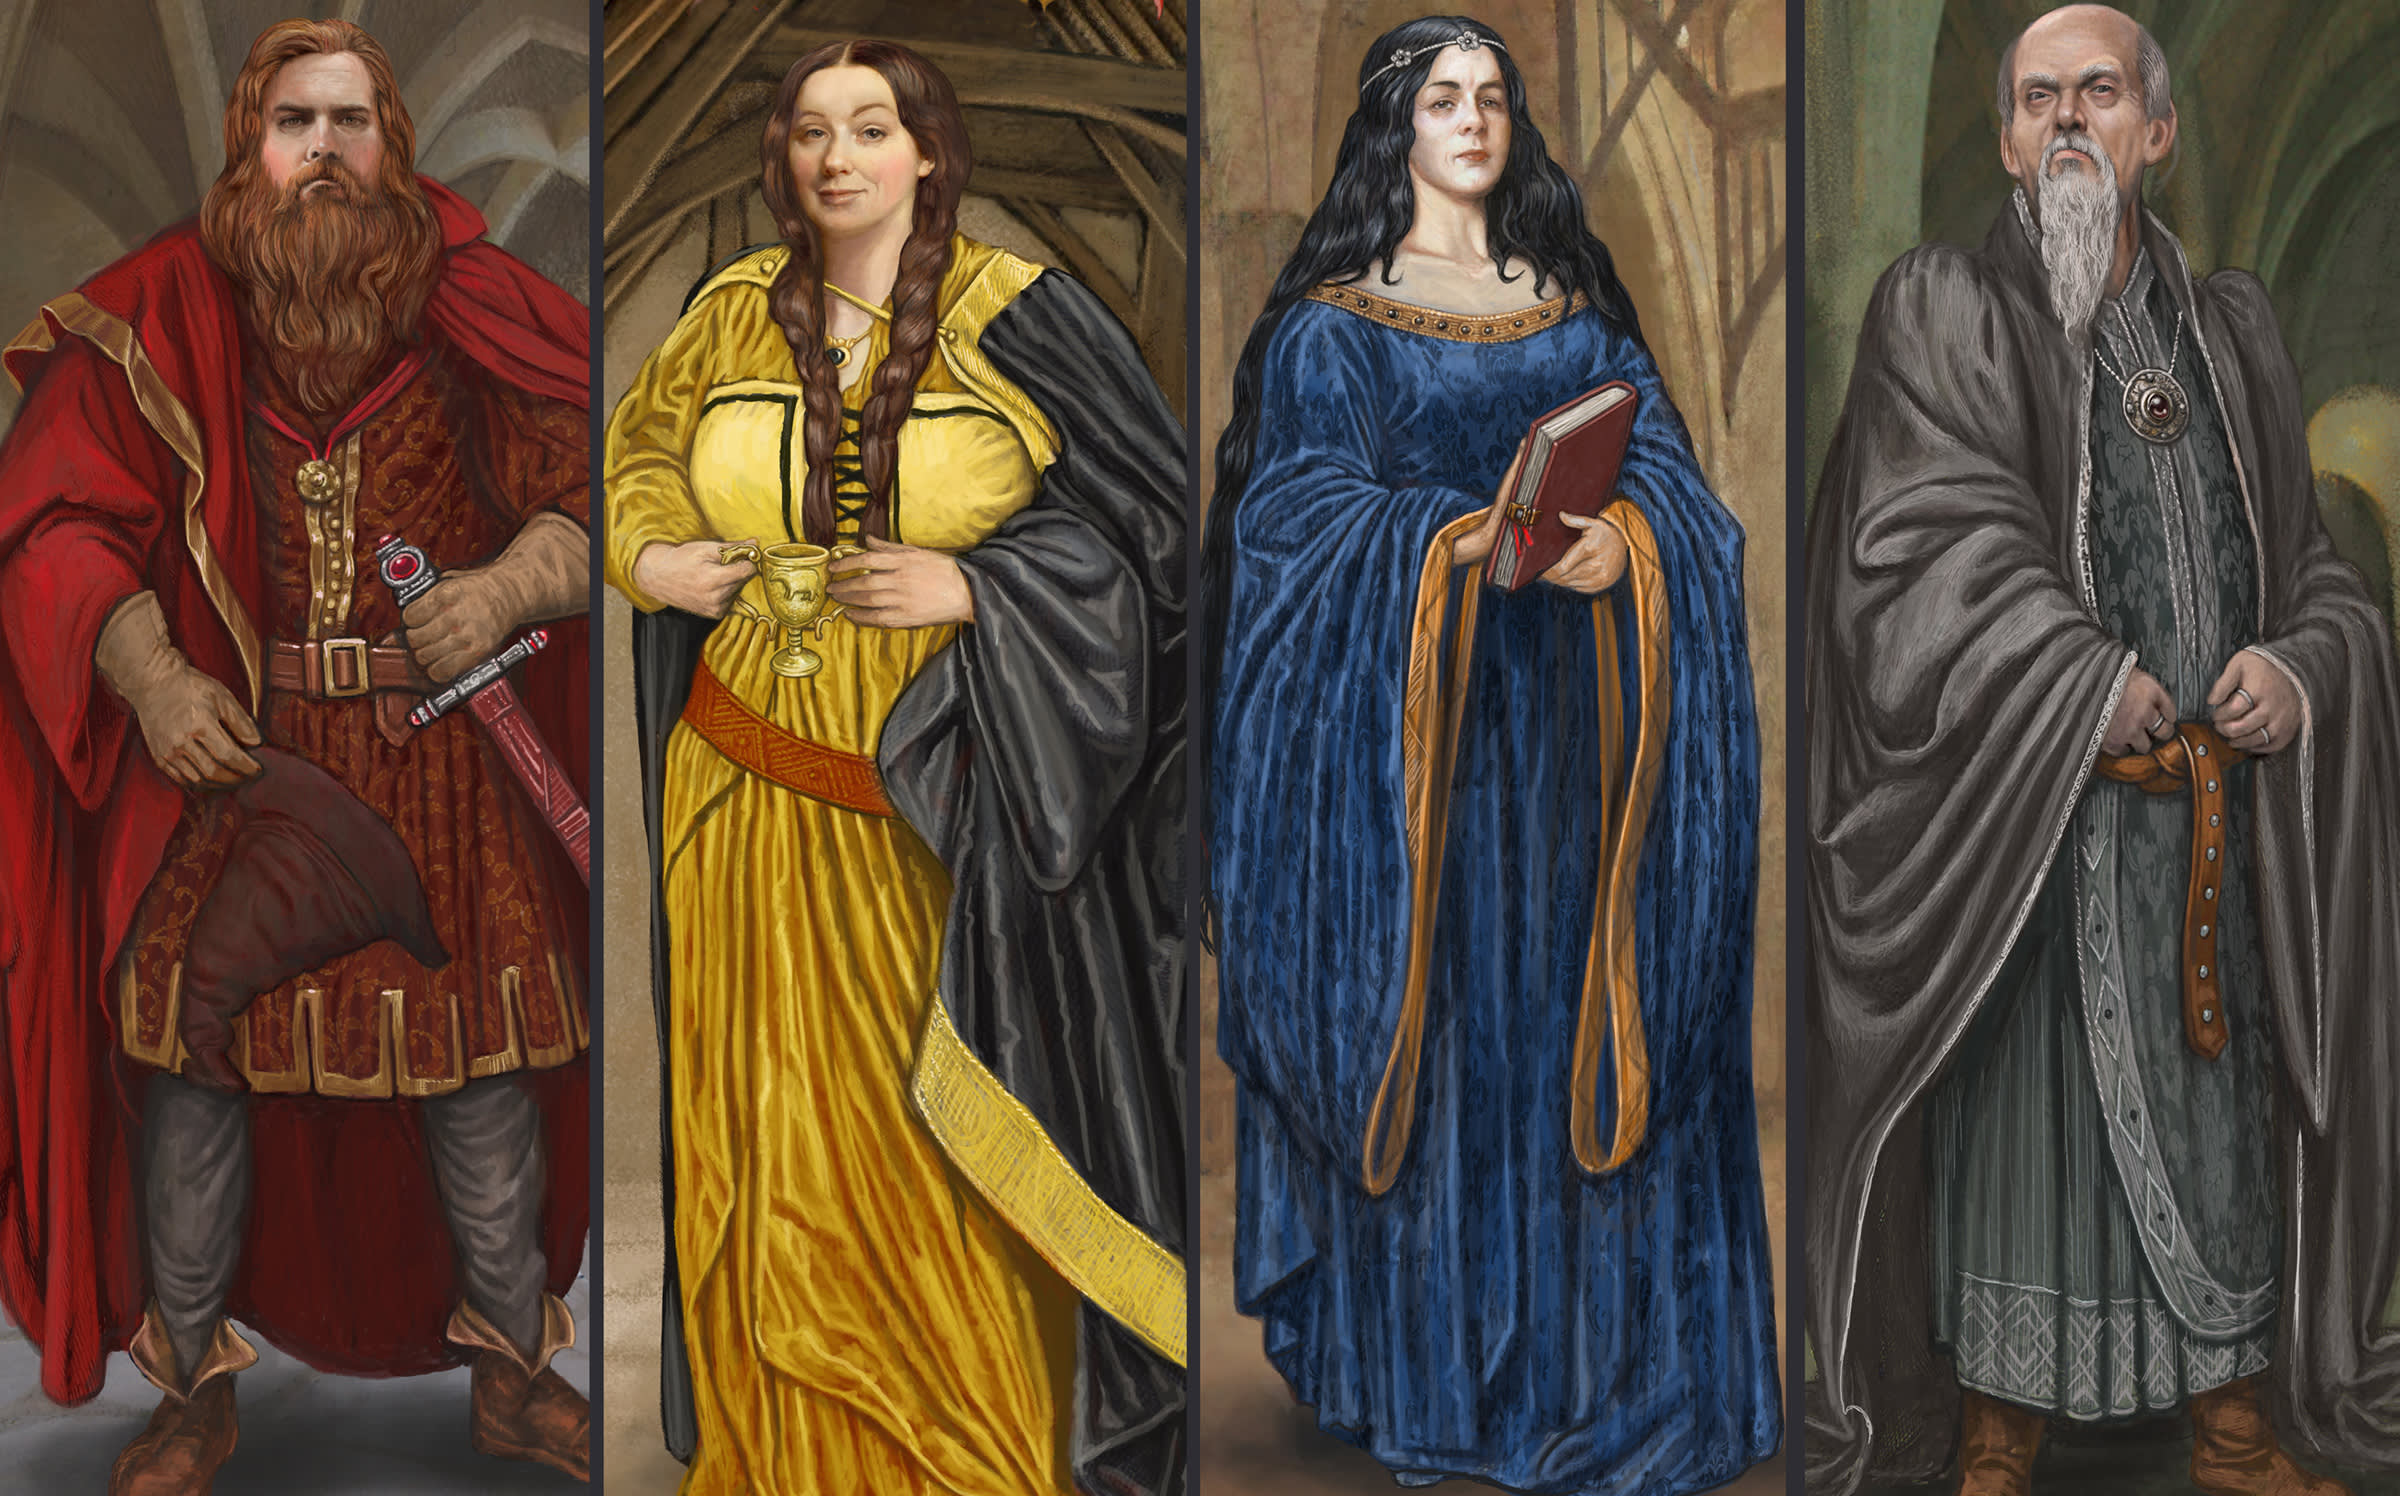 Illustration of founders of the four houses - Gryffindor, Hufflepuff, Ravenclaw and Slytherin